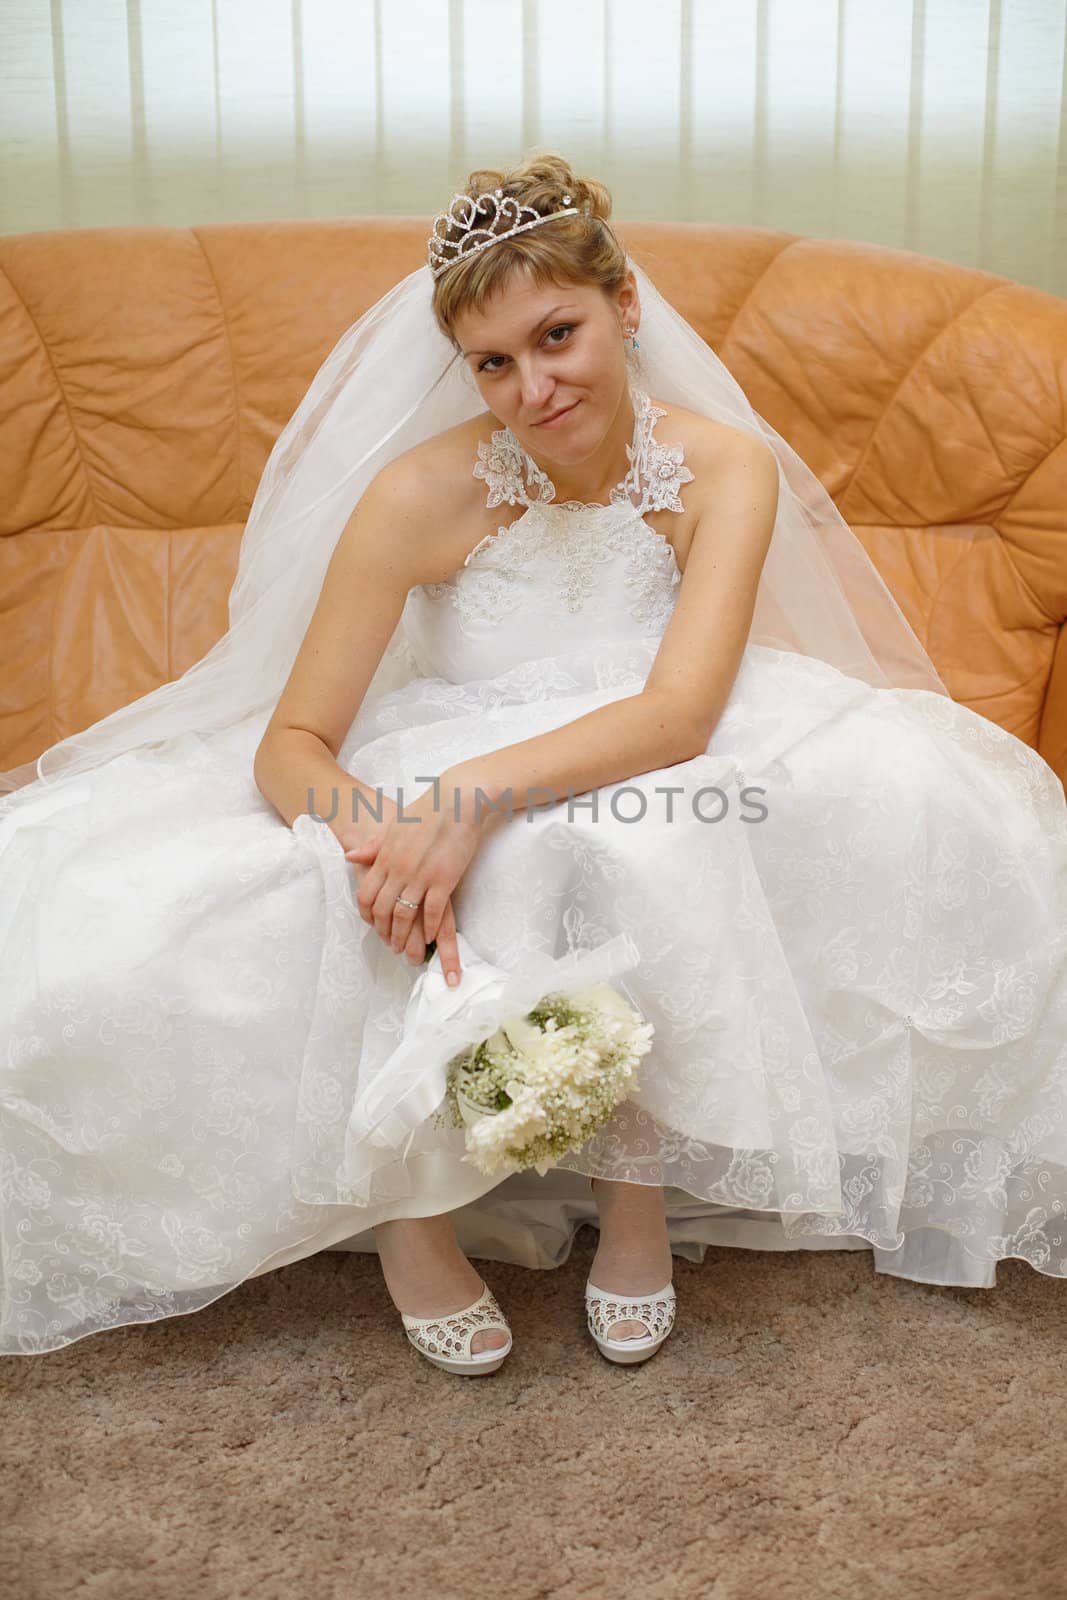 Bride sitting on the sofa waiting for the ceremony